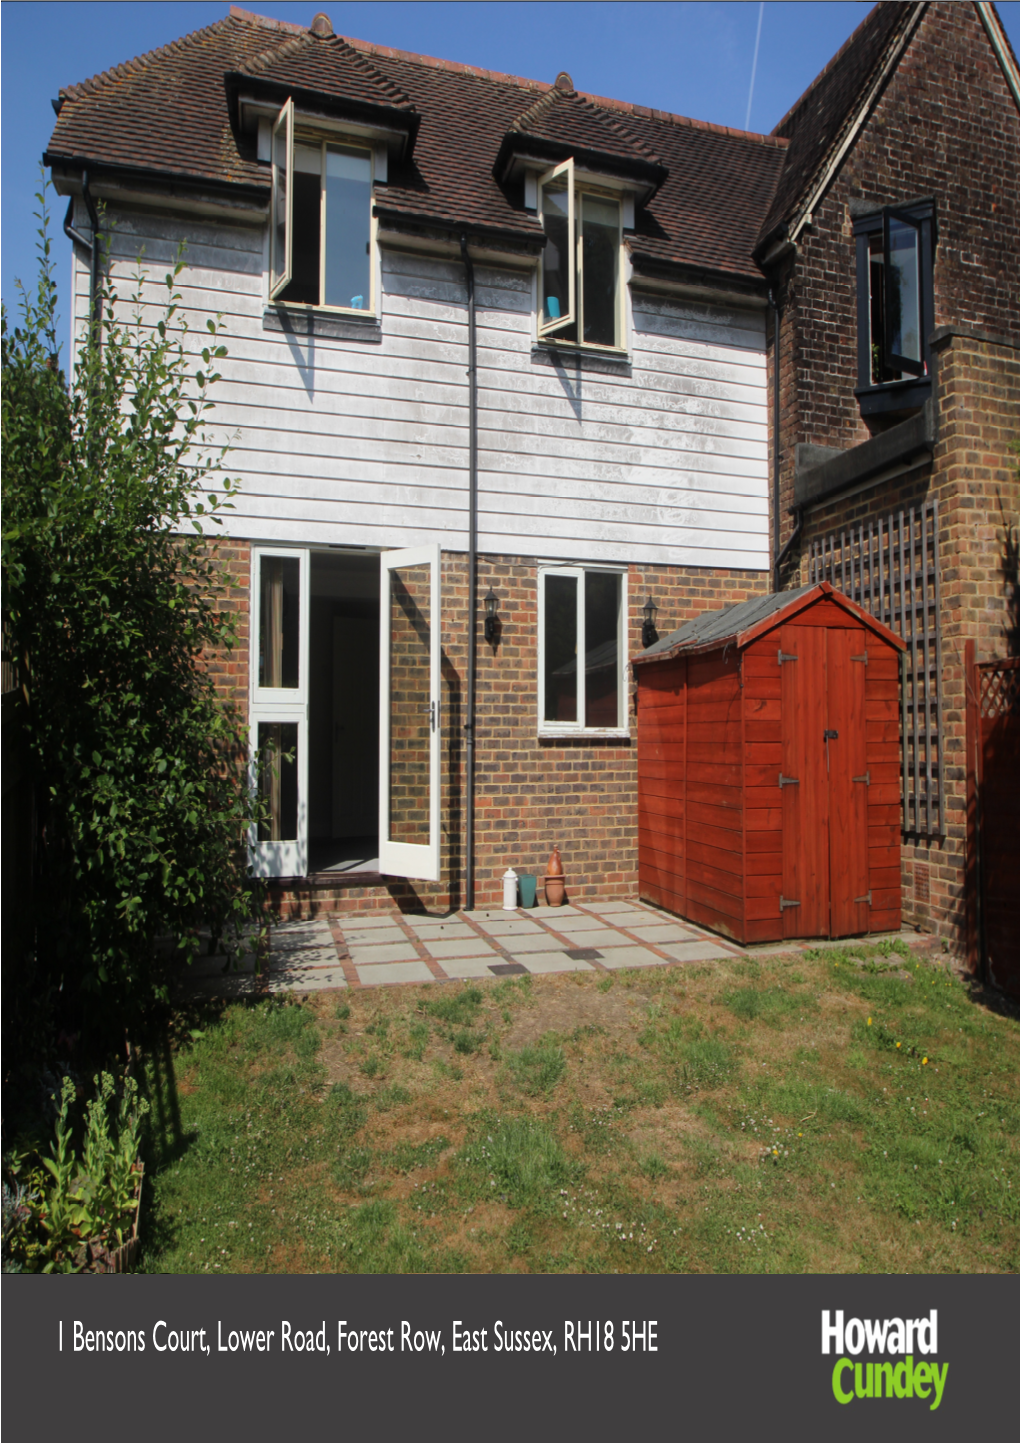 1 Bensons Court, Lower Road, Forest Row, East Sussex, RH18 5HE